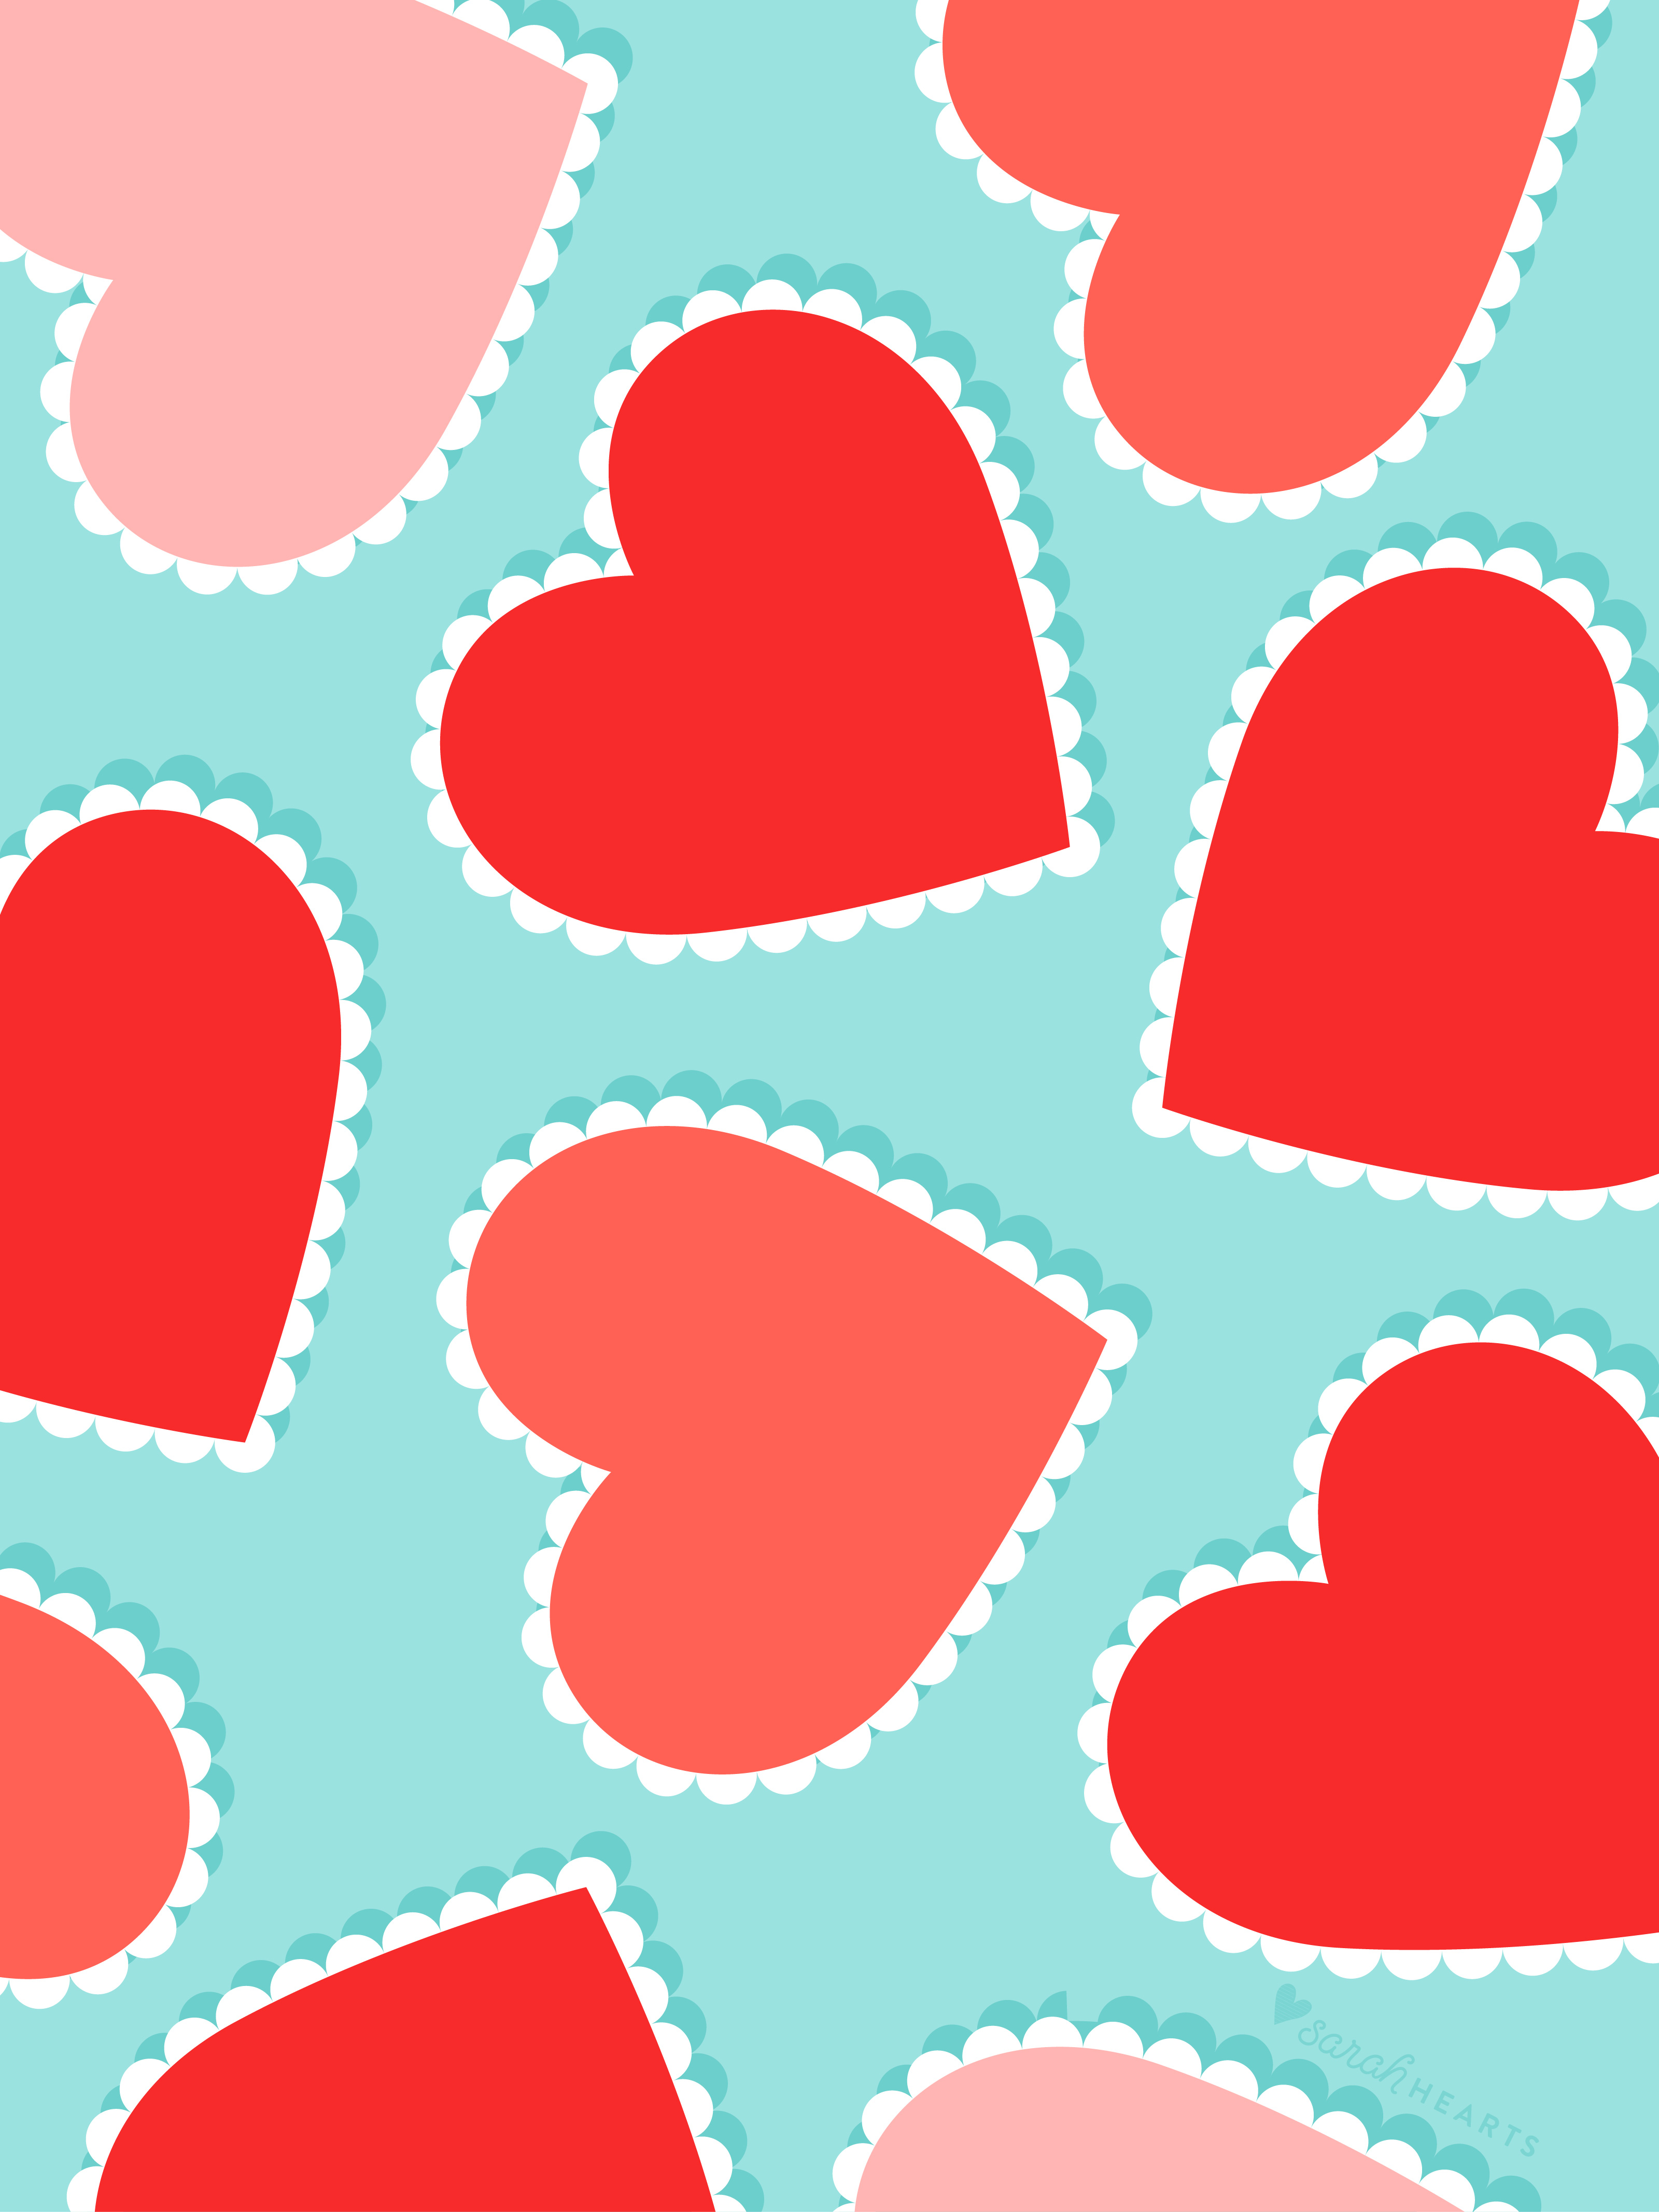 Page 30  Colorful Heart Wallpaper Images  Free Download on Freepik